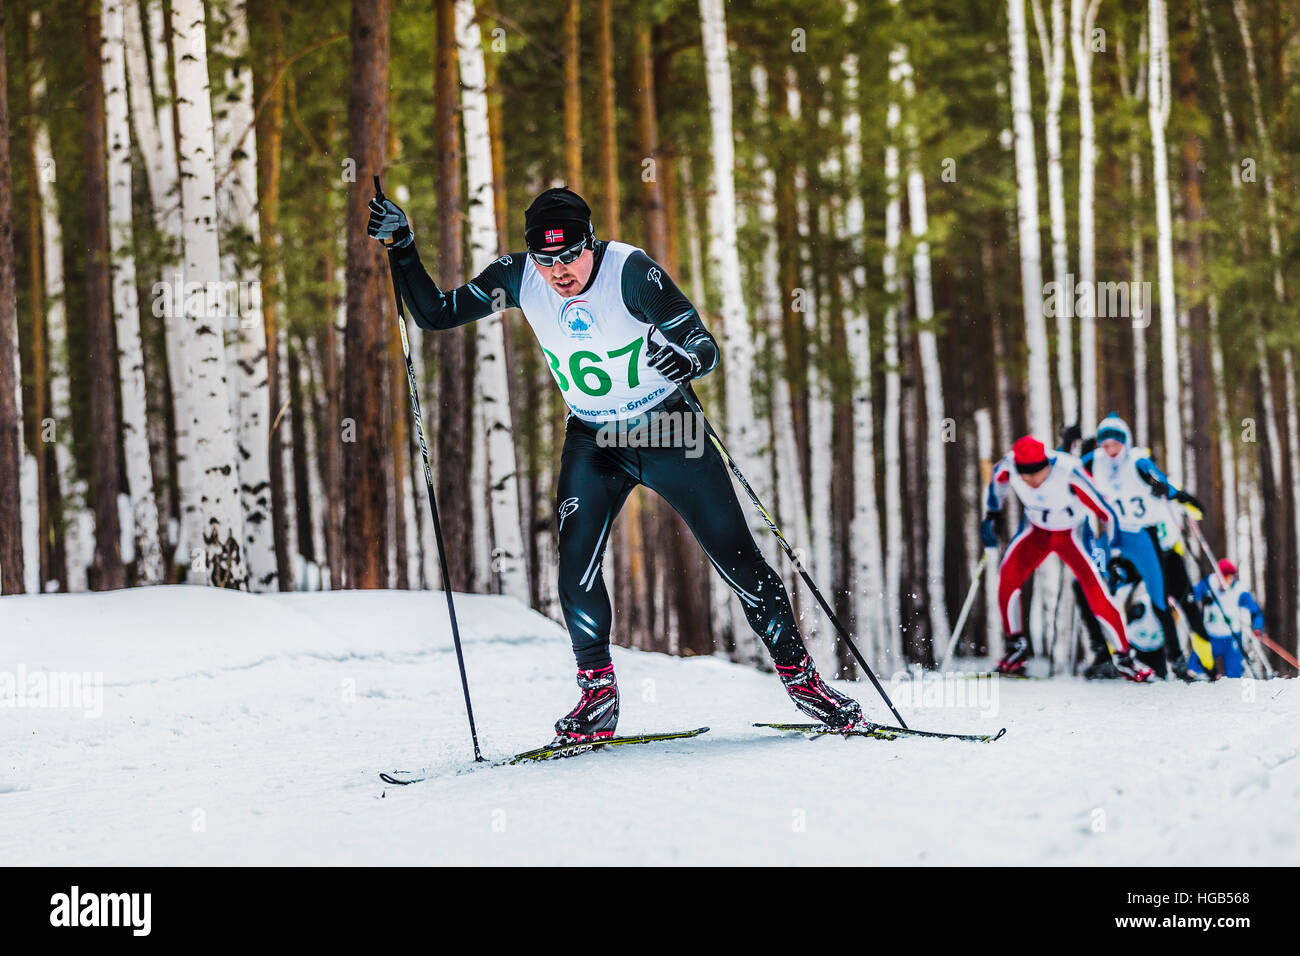 group of skiers men in winter forest free style in mountain during Championship on cross country skiing Stock Photo